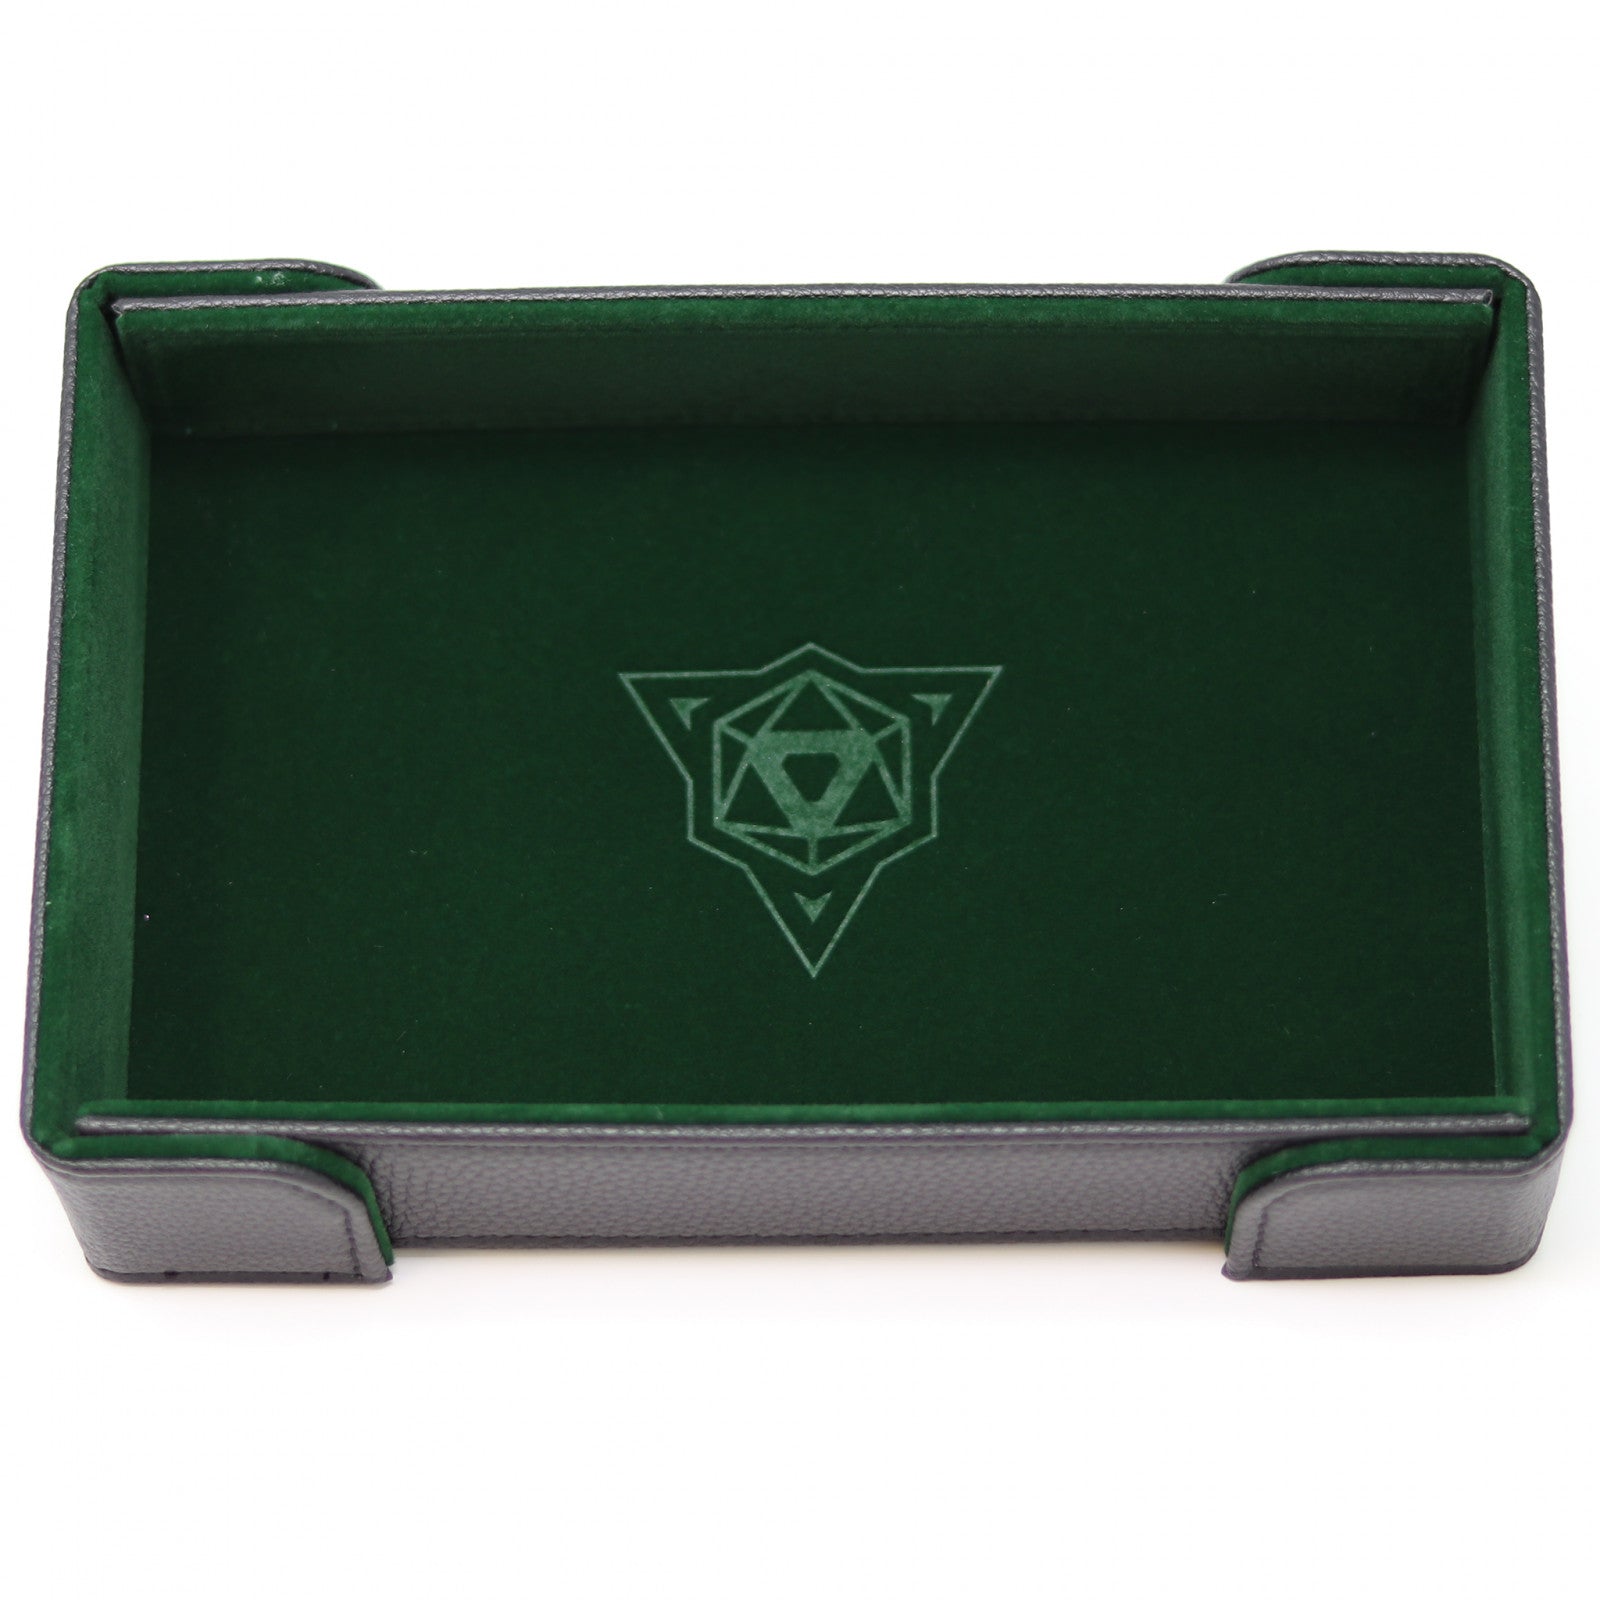 Die Hard Dice Folding Rectangle Tray - Green Velvet Dice Tray Lets Play Games   